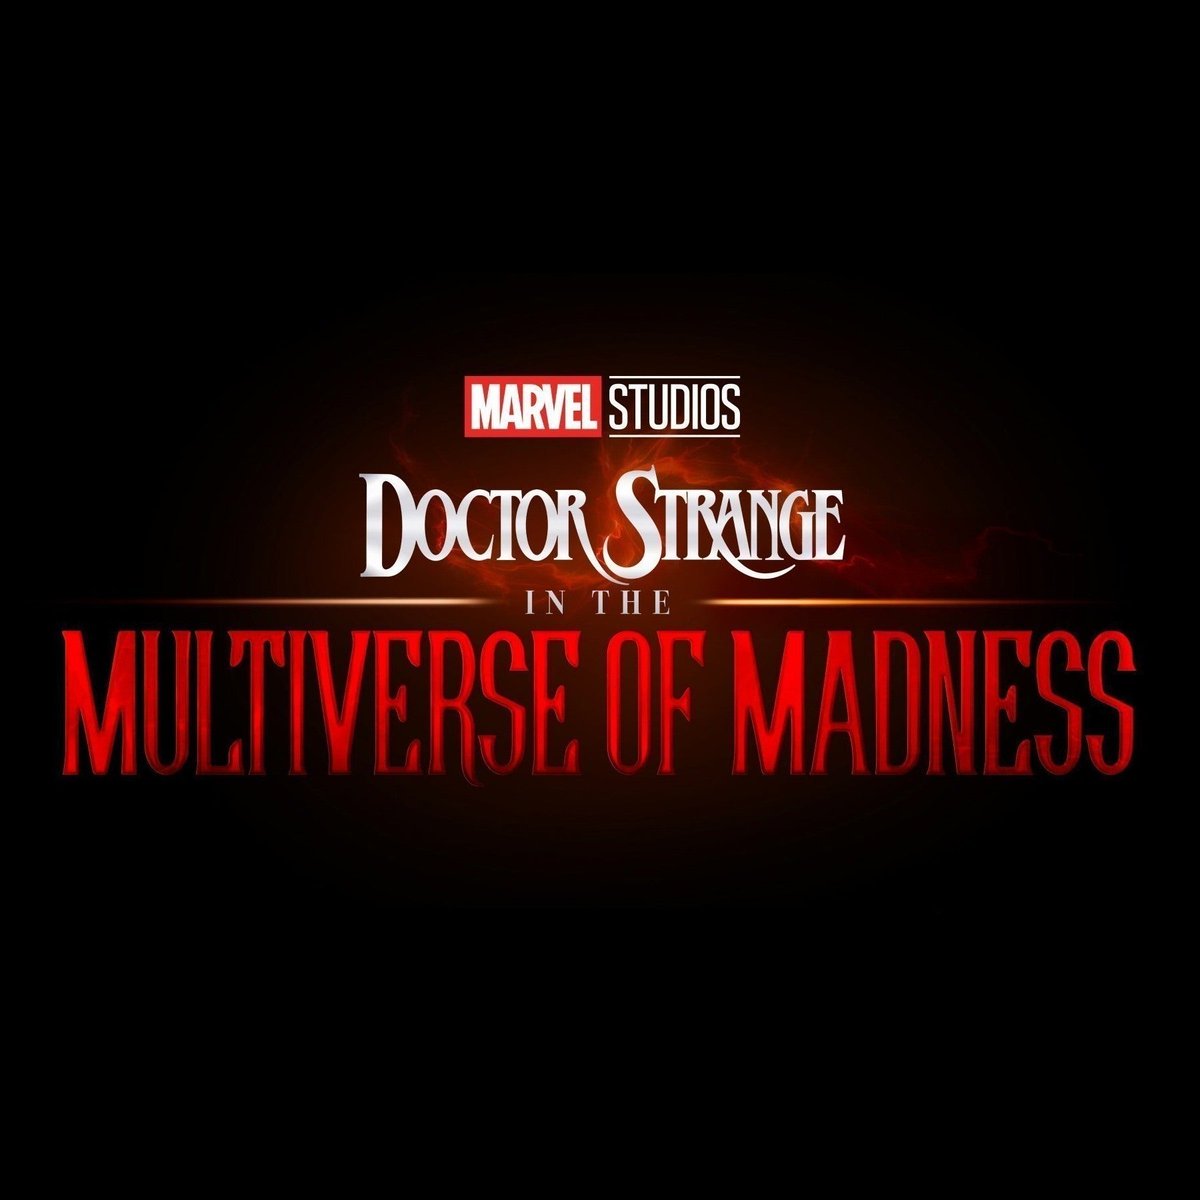 #DoctorStrange #PatrickStewart

Patrick Stewart said he was visibly frustrated and disappointed during the shooting of the 'DOCTOR STRANGE: MULTIVERSE OF MADNESS' sequence.

(Source: youtu.be/RjtqmYQoWpM?si…)